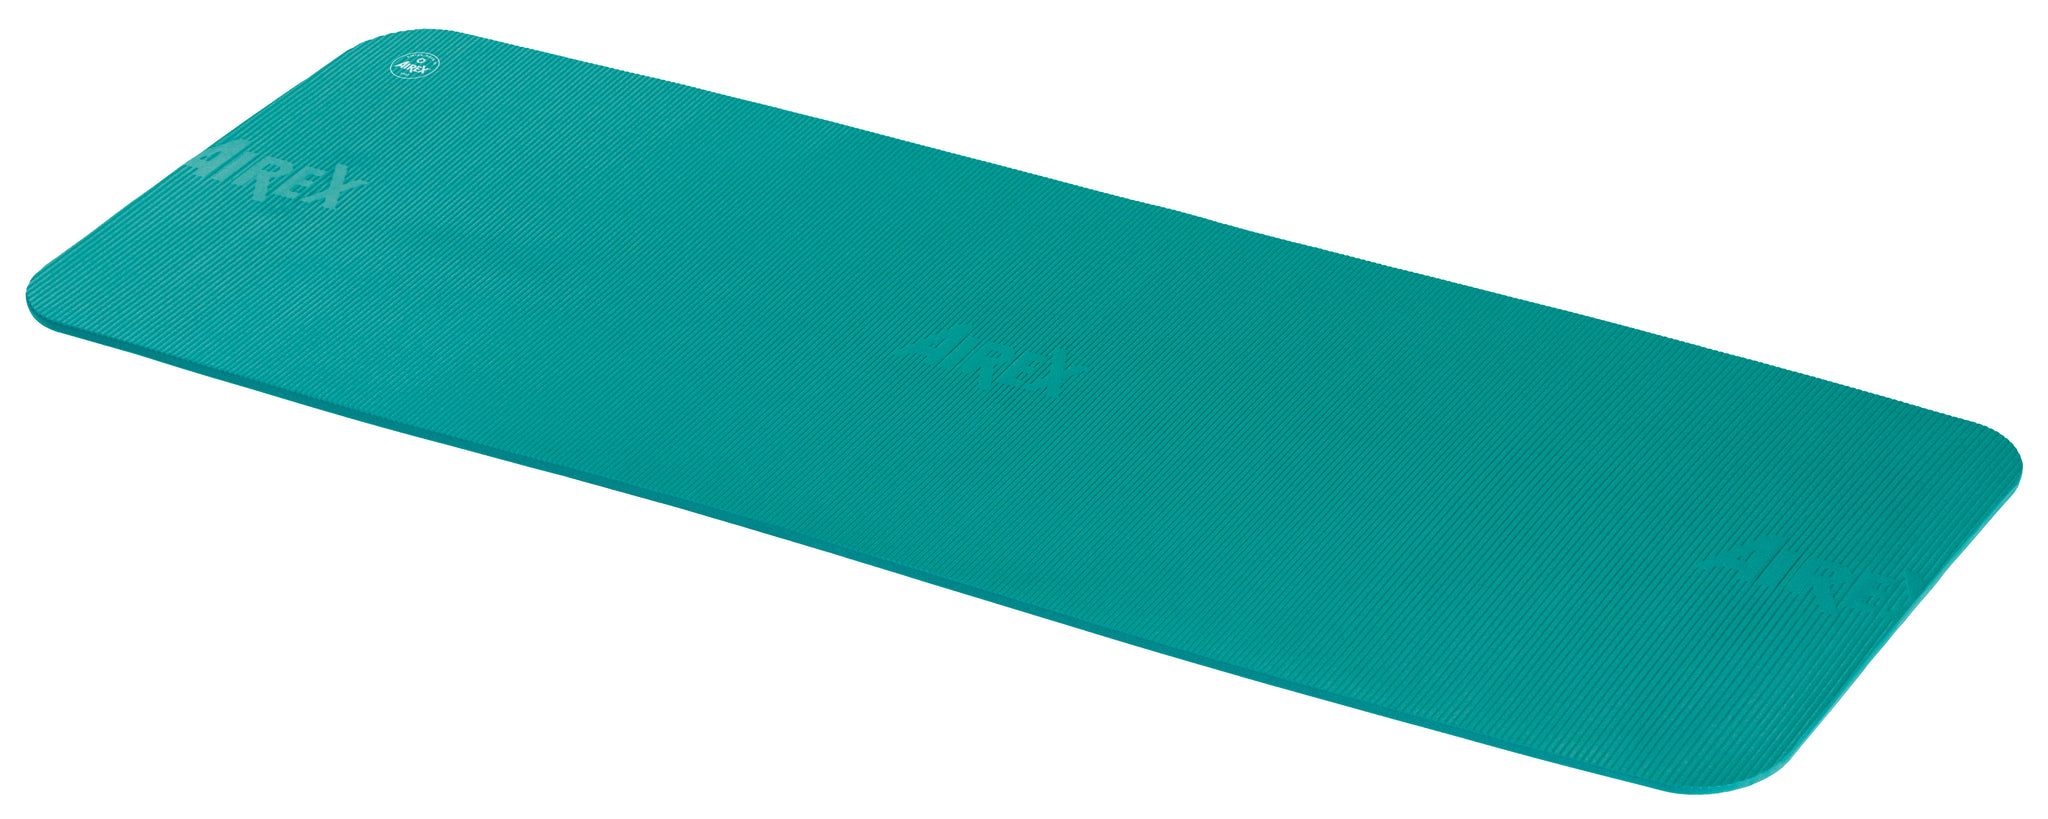 Airex Fitline 180 Exercise Mat w/ Mat Bag